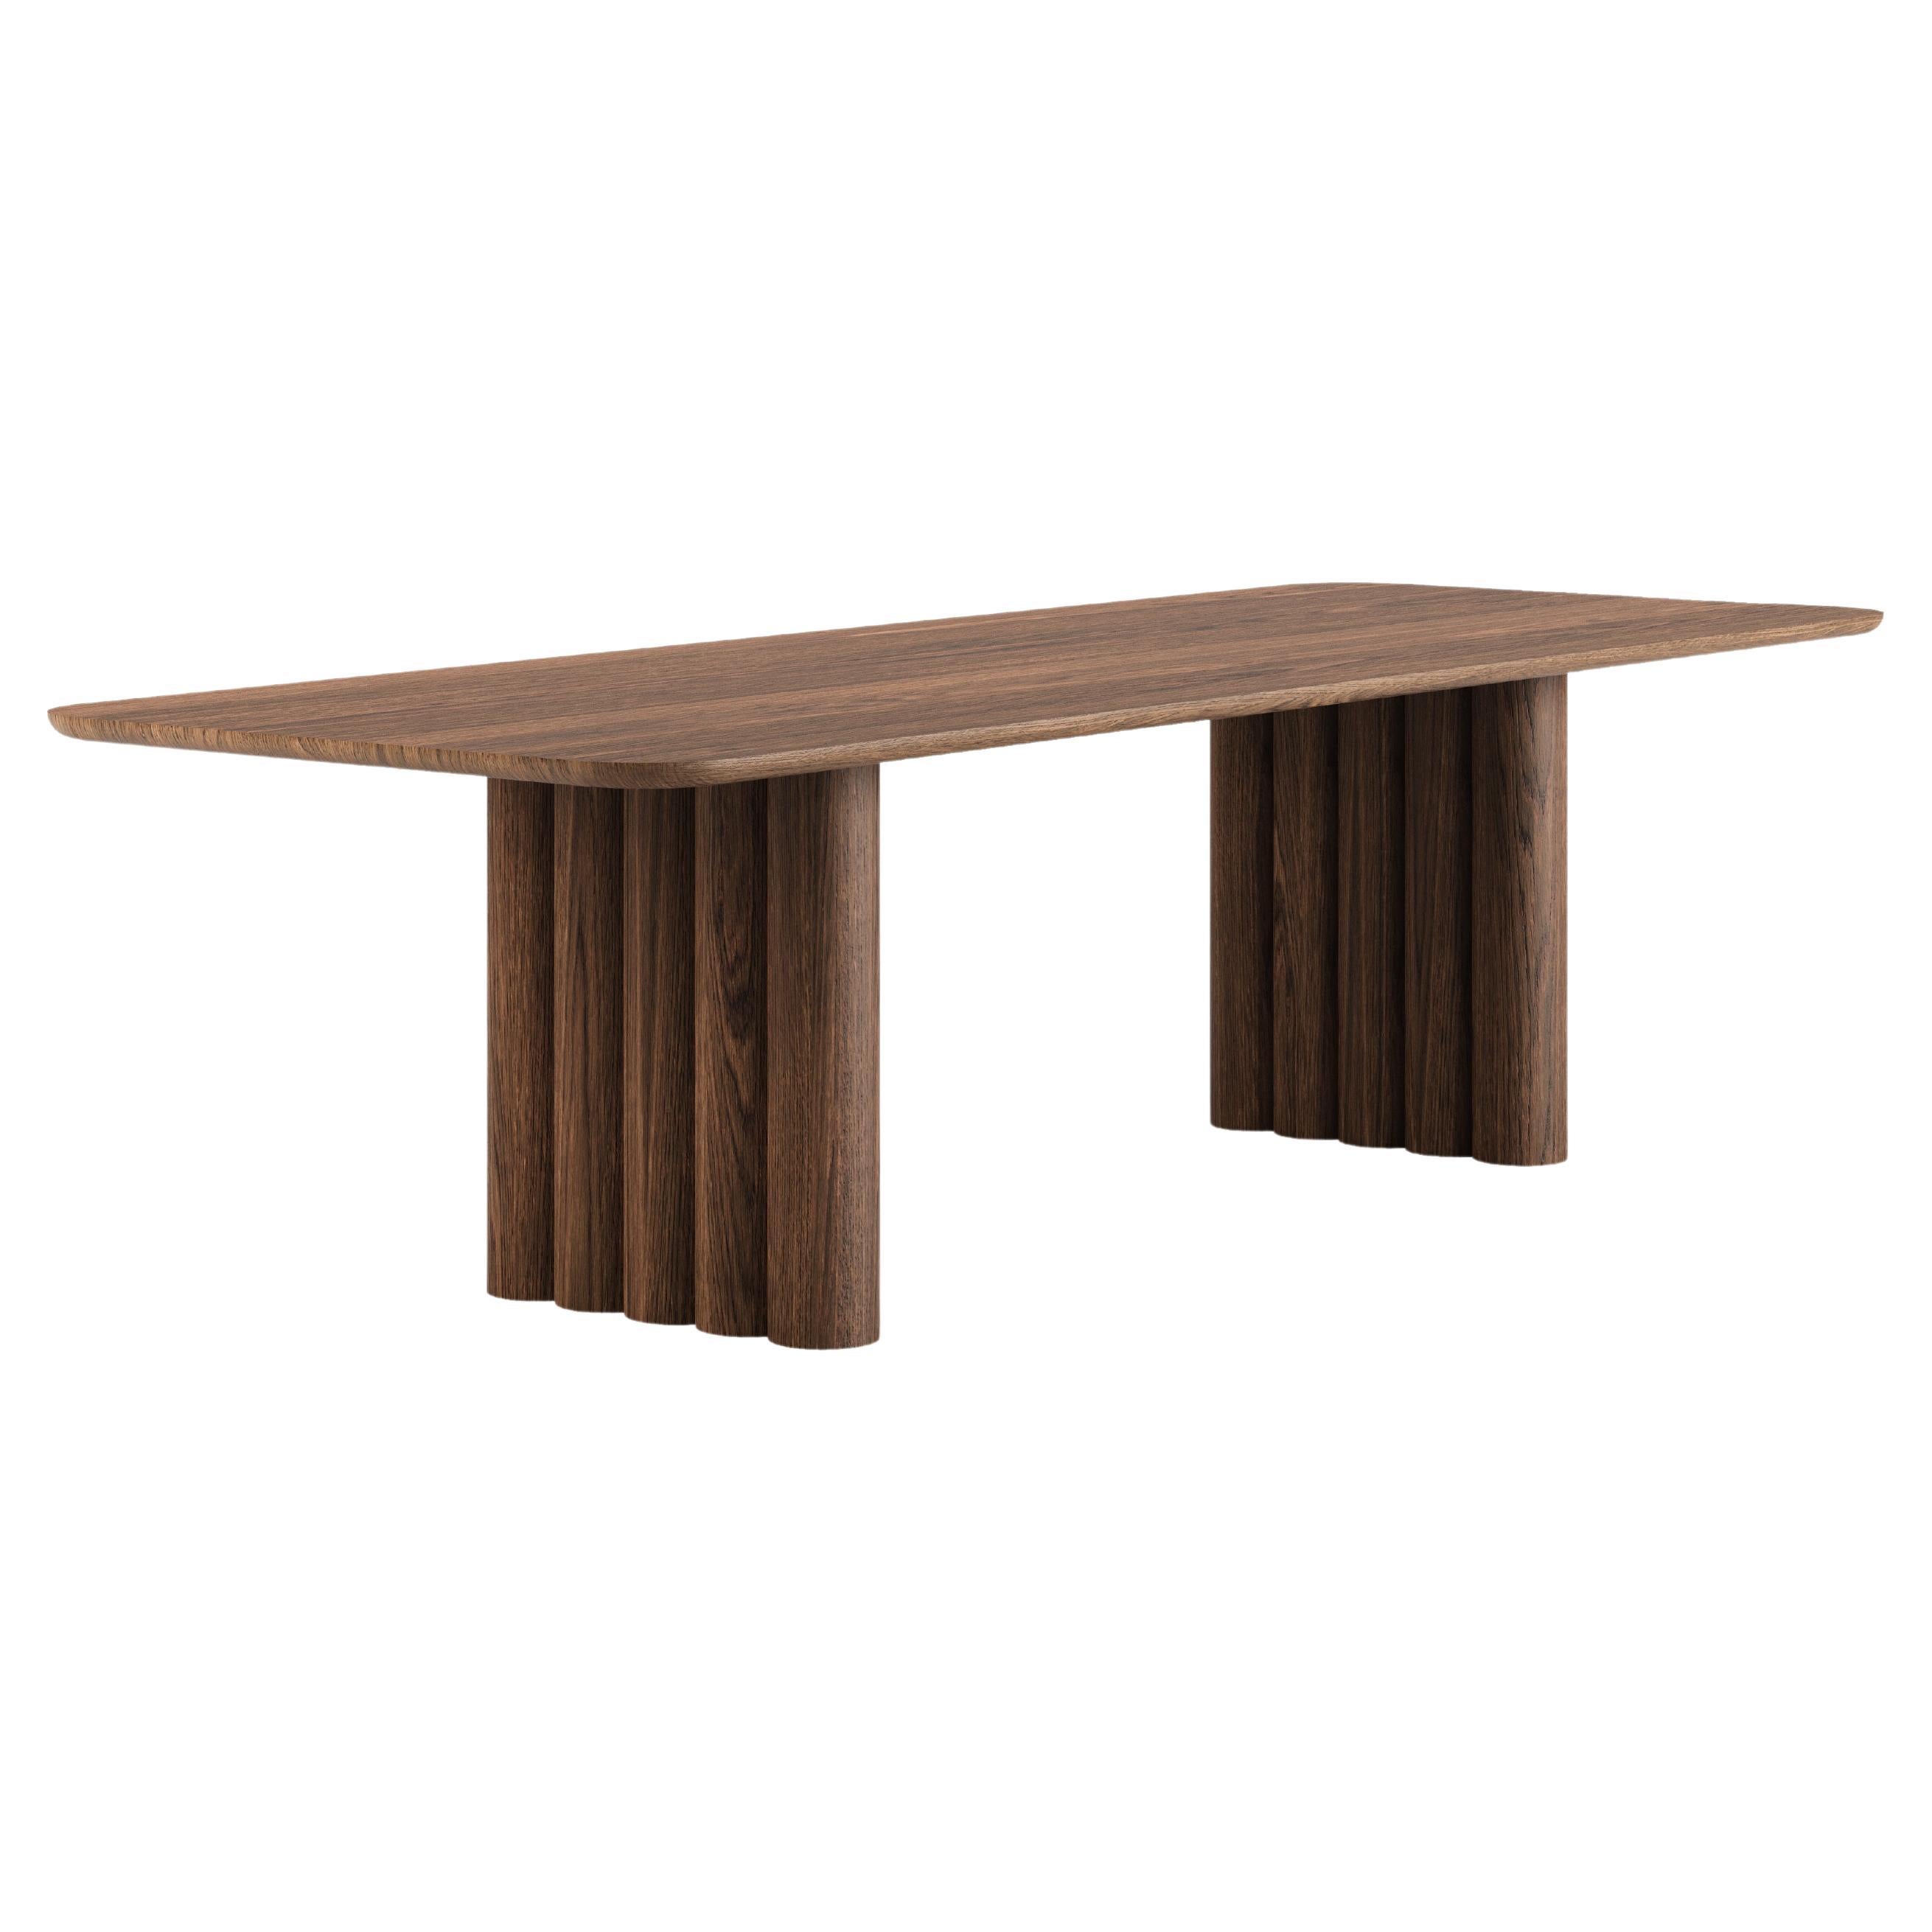 Contemporary Dining Table 'Plush' by Dk3, Smoked Oak or Walnut, 240, Rectangular